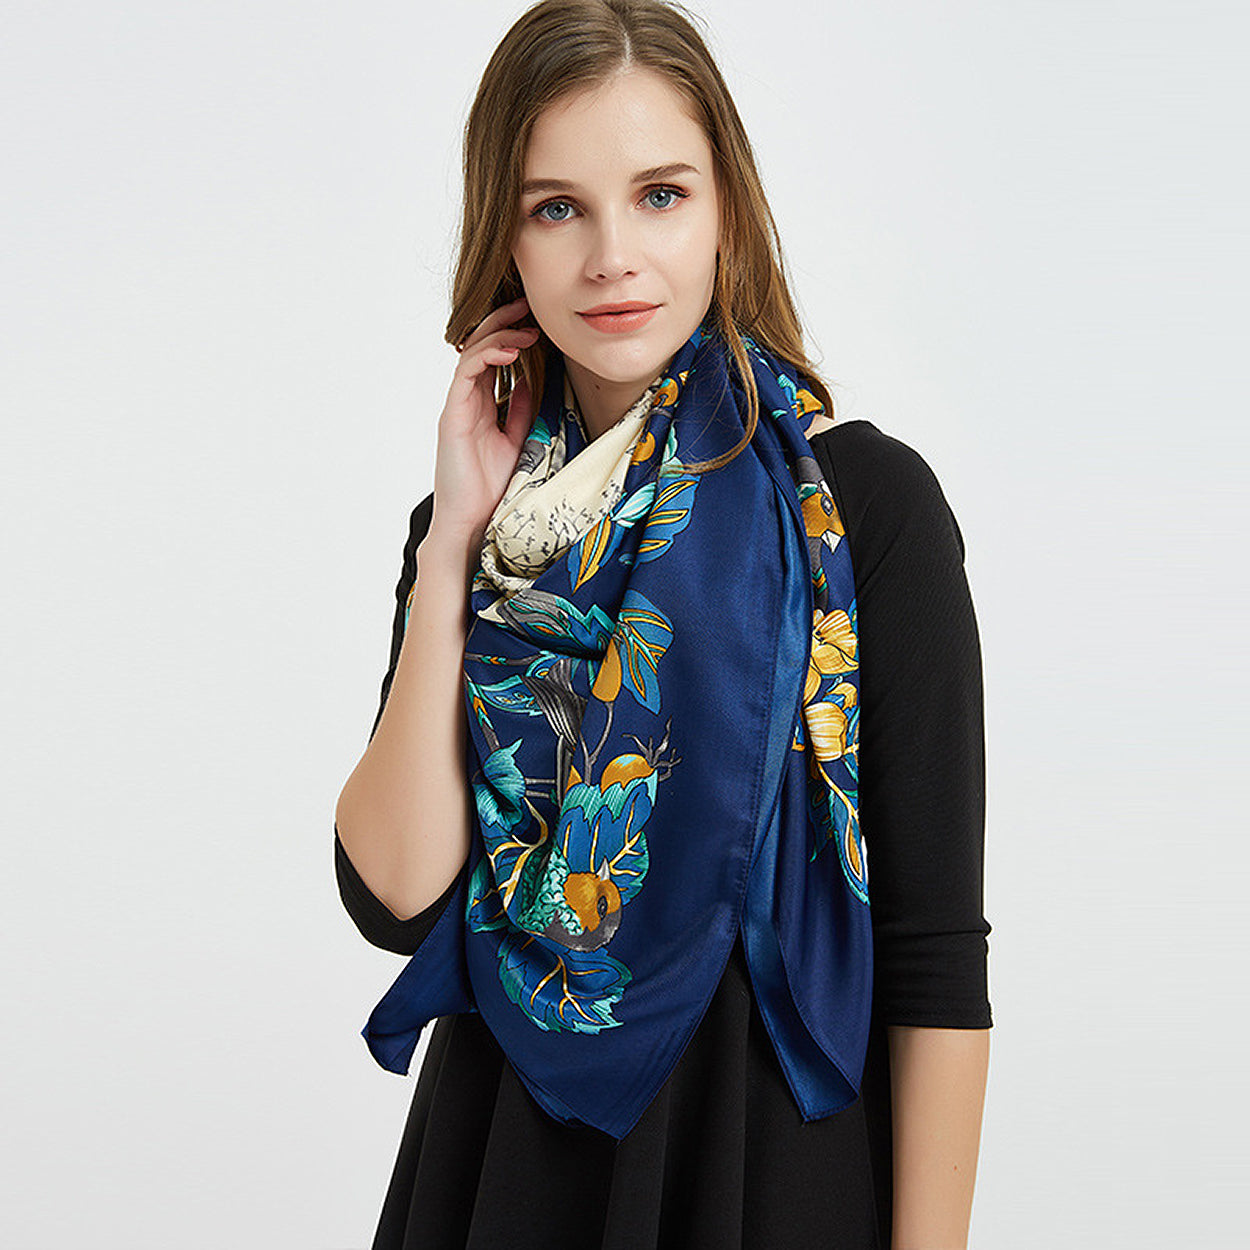 Womens Silk Scarf Fashion Lady Square BYCUCCI Scarves Soft Shawls  Pashmina Solid Color Bandana From Hanhan6688, $24.53